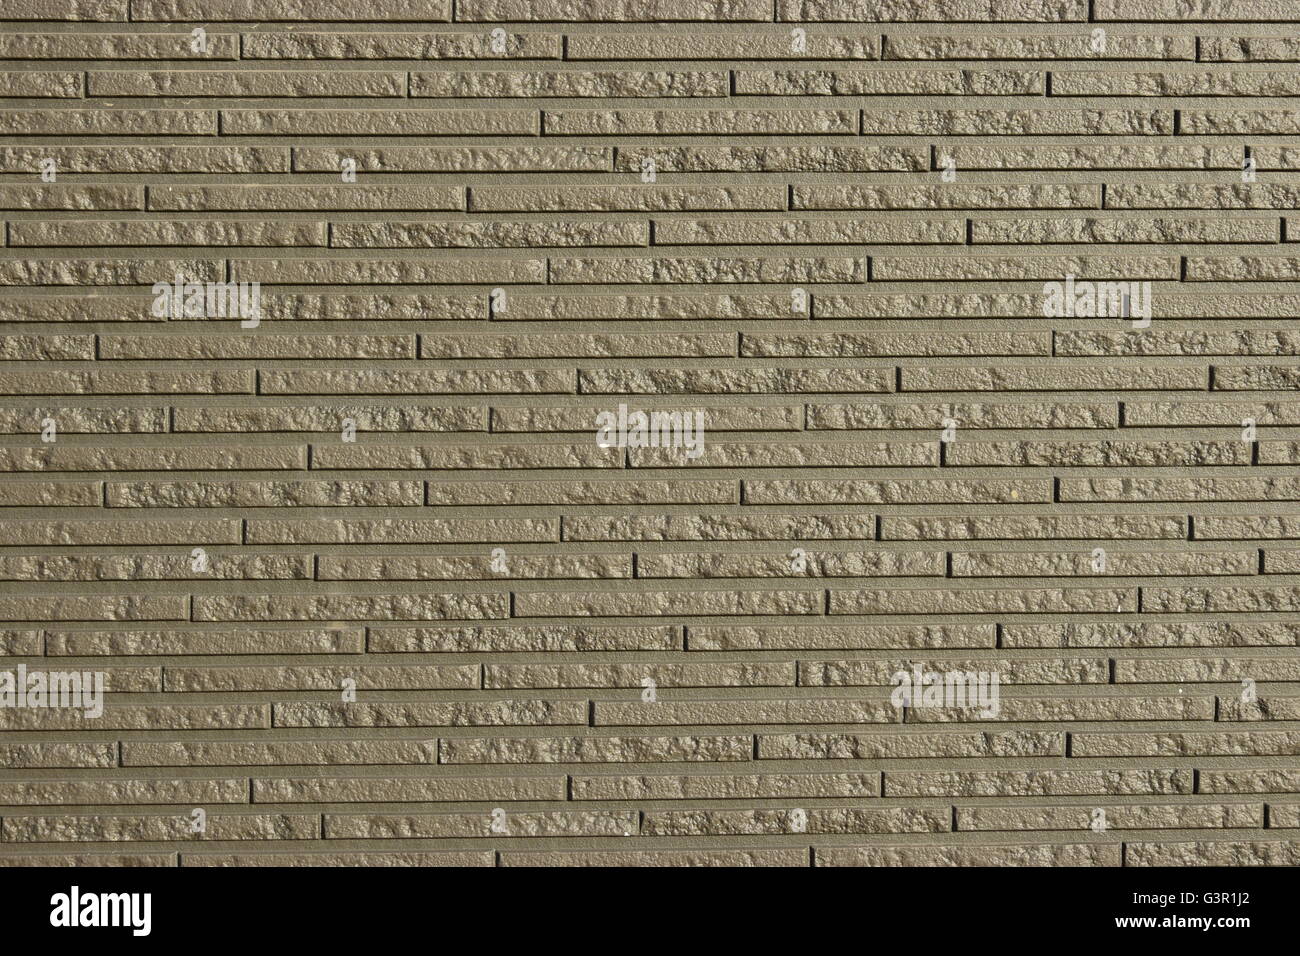 Background of tiles Stock Photo